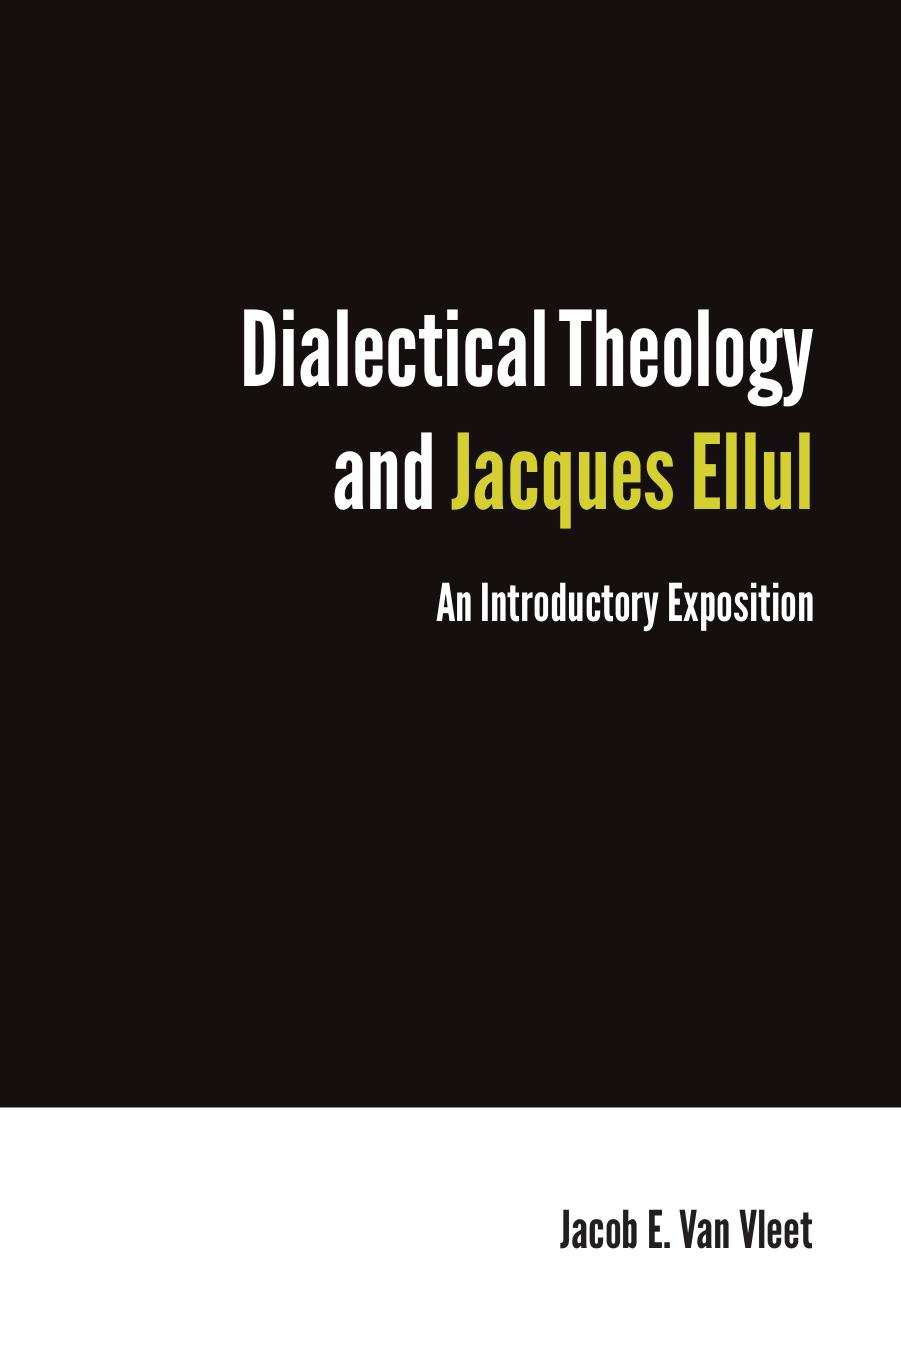 Dialectical Theology and Jacques Ellul: An Introductory Exposition